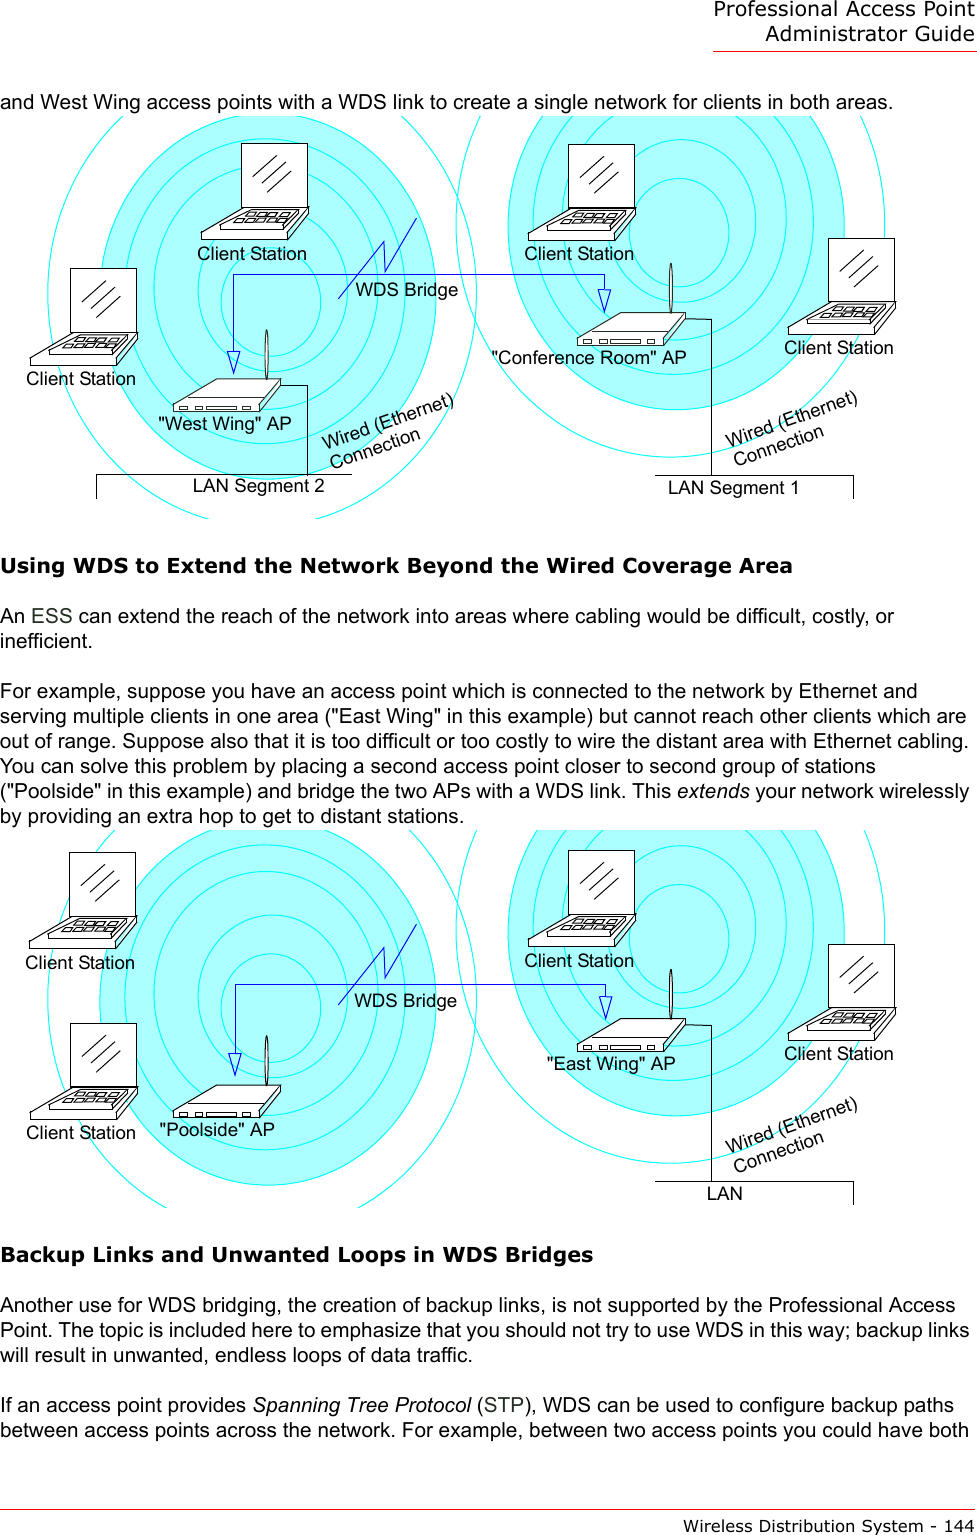 Professional Access Point Administrator GuideWireless Distribution System - 144and West Wing access points with a WDS link to create a single network for clients in both areas.Using WDS to Extend the Network Beyond the Wired Coverage AreaAn ESS can extend the reach of the network into areas where cabling would be difficult, costly, or inefficient.For example, suppose you have an access point which is connected to the network by Ethernet and serving multiple clients in one area (&quot;East Wing&quot; in this example) but cannot reach other clients which are out of range. Suppose also that it is too difficult or too costly to wire the distant area with Ethernet cabling. You can solve this problem by placing a second access point closer to second group of stations (&quot;Poolside&quot; in this example) and bridge the two APs with a WDS link. This extends your network wirelessly by providing an extra hop to get to distant stations.Backup Links and Unwanted Loops in WDS BridgesAnother use for WDS bridging, the creation of backup links, is not supported by the Professional Access Point. The topic is included here to emphasize that you should not try to use WDS in this way; backup links will result in unwanted, endless loops of data traffic.If an access point provides Spanning Tree Protocol (STP), WDS can be used to configure backup paths between access points across the network. For example, between two access points you could have both WDS BridgeClient StationClient StationClient Station&quot;Conference Room&quot; AP&quot;West Wing&quot; APClient StationLAN Segment 2 LAN Segment 1Wired (Ethernet)ConnectionWired (Ethernet)ConnectionWDS BridgeClient StationClient StationClient Station&quot;East Wing&quot; AP&quot;Poolside&quot; APClient StationLANWired (Ethernet)Connection